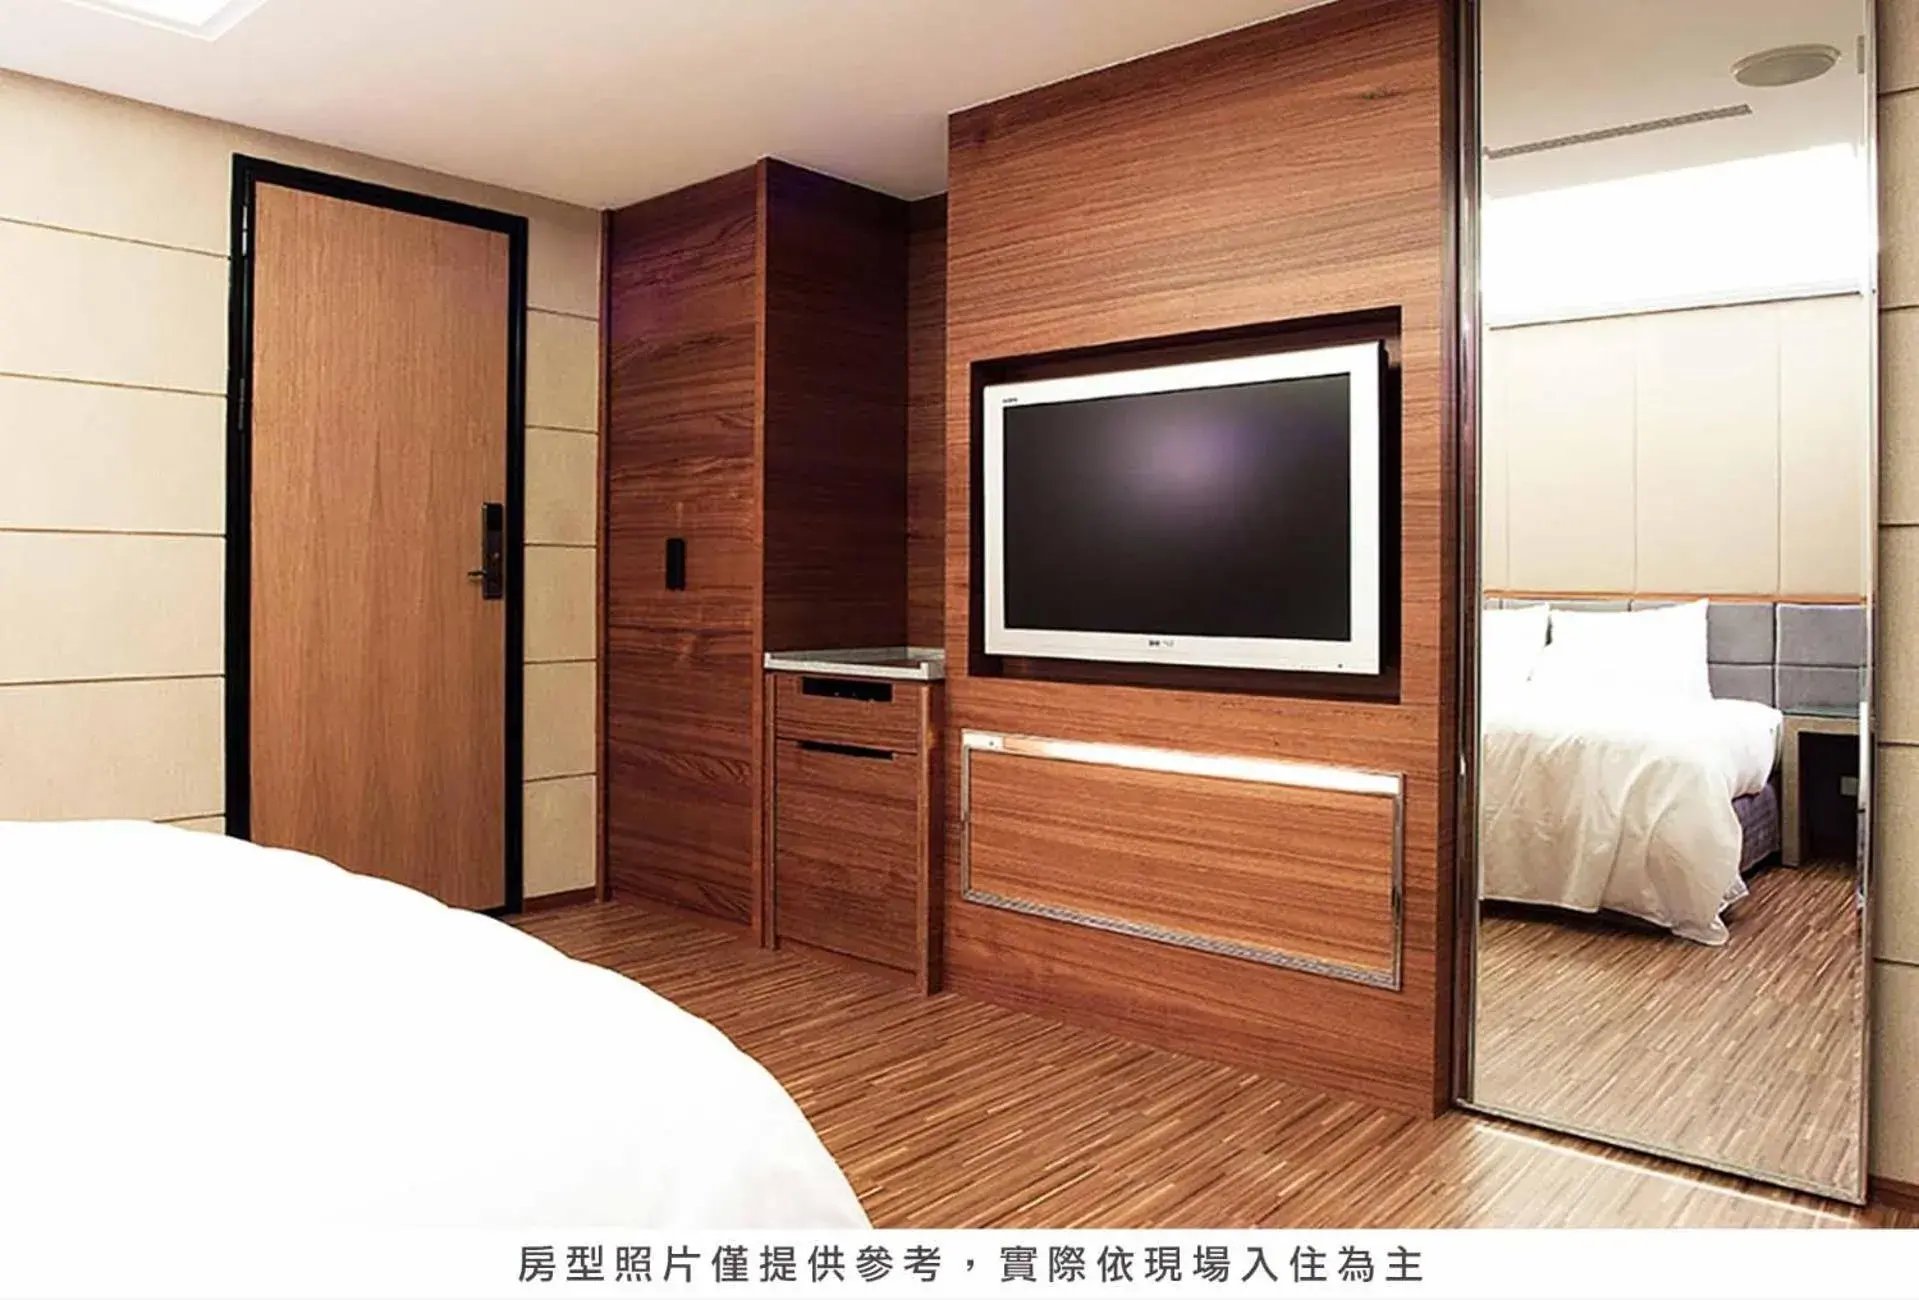 Bed in Royal Group Hotel Chun Shan Branch